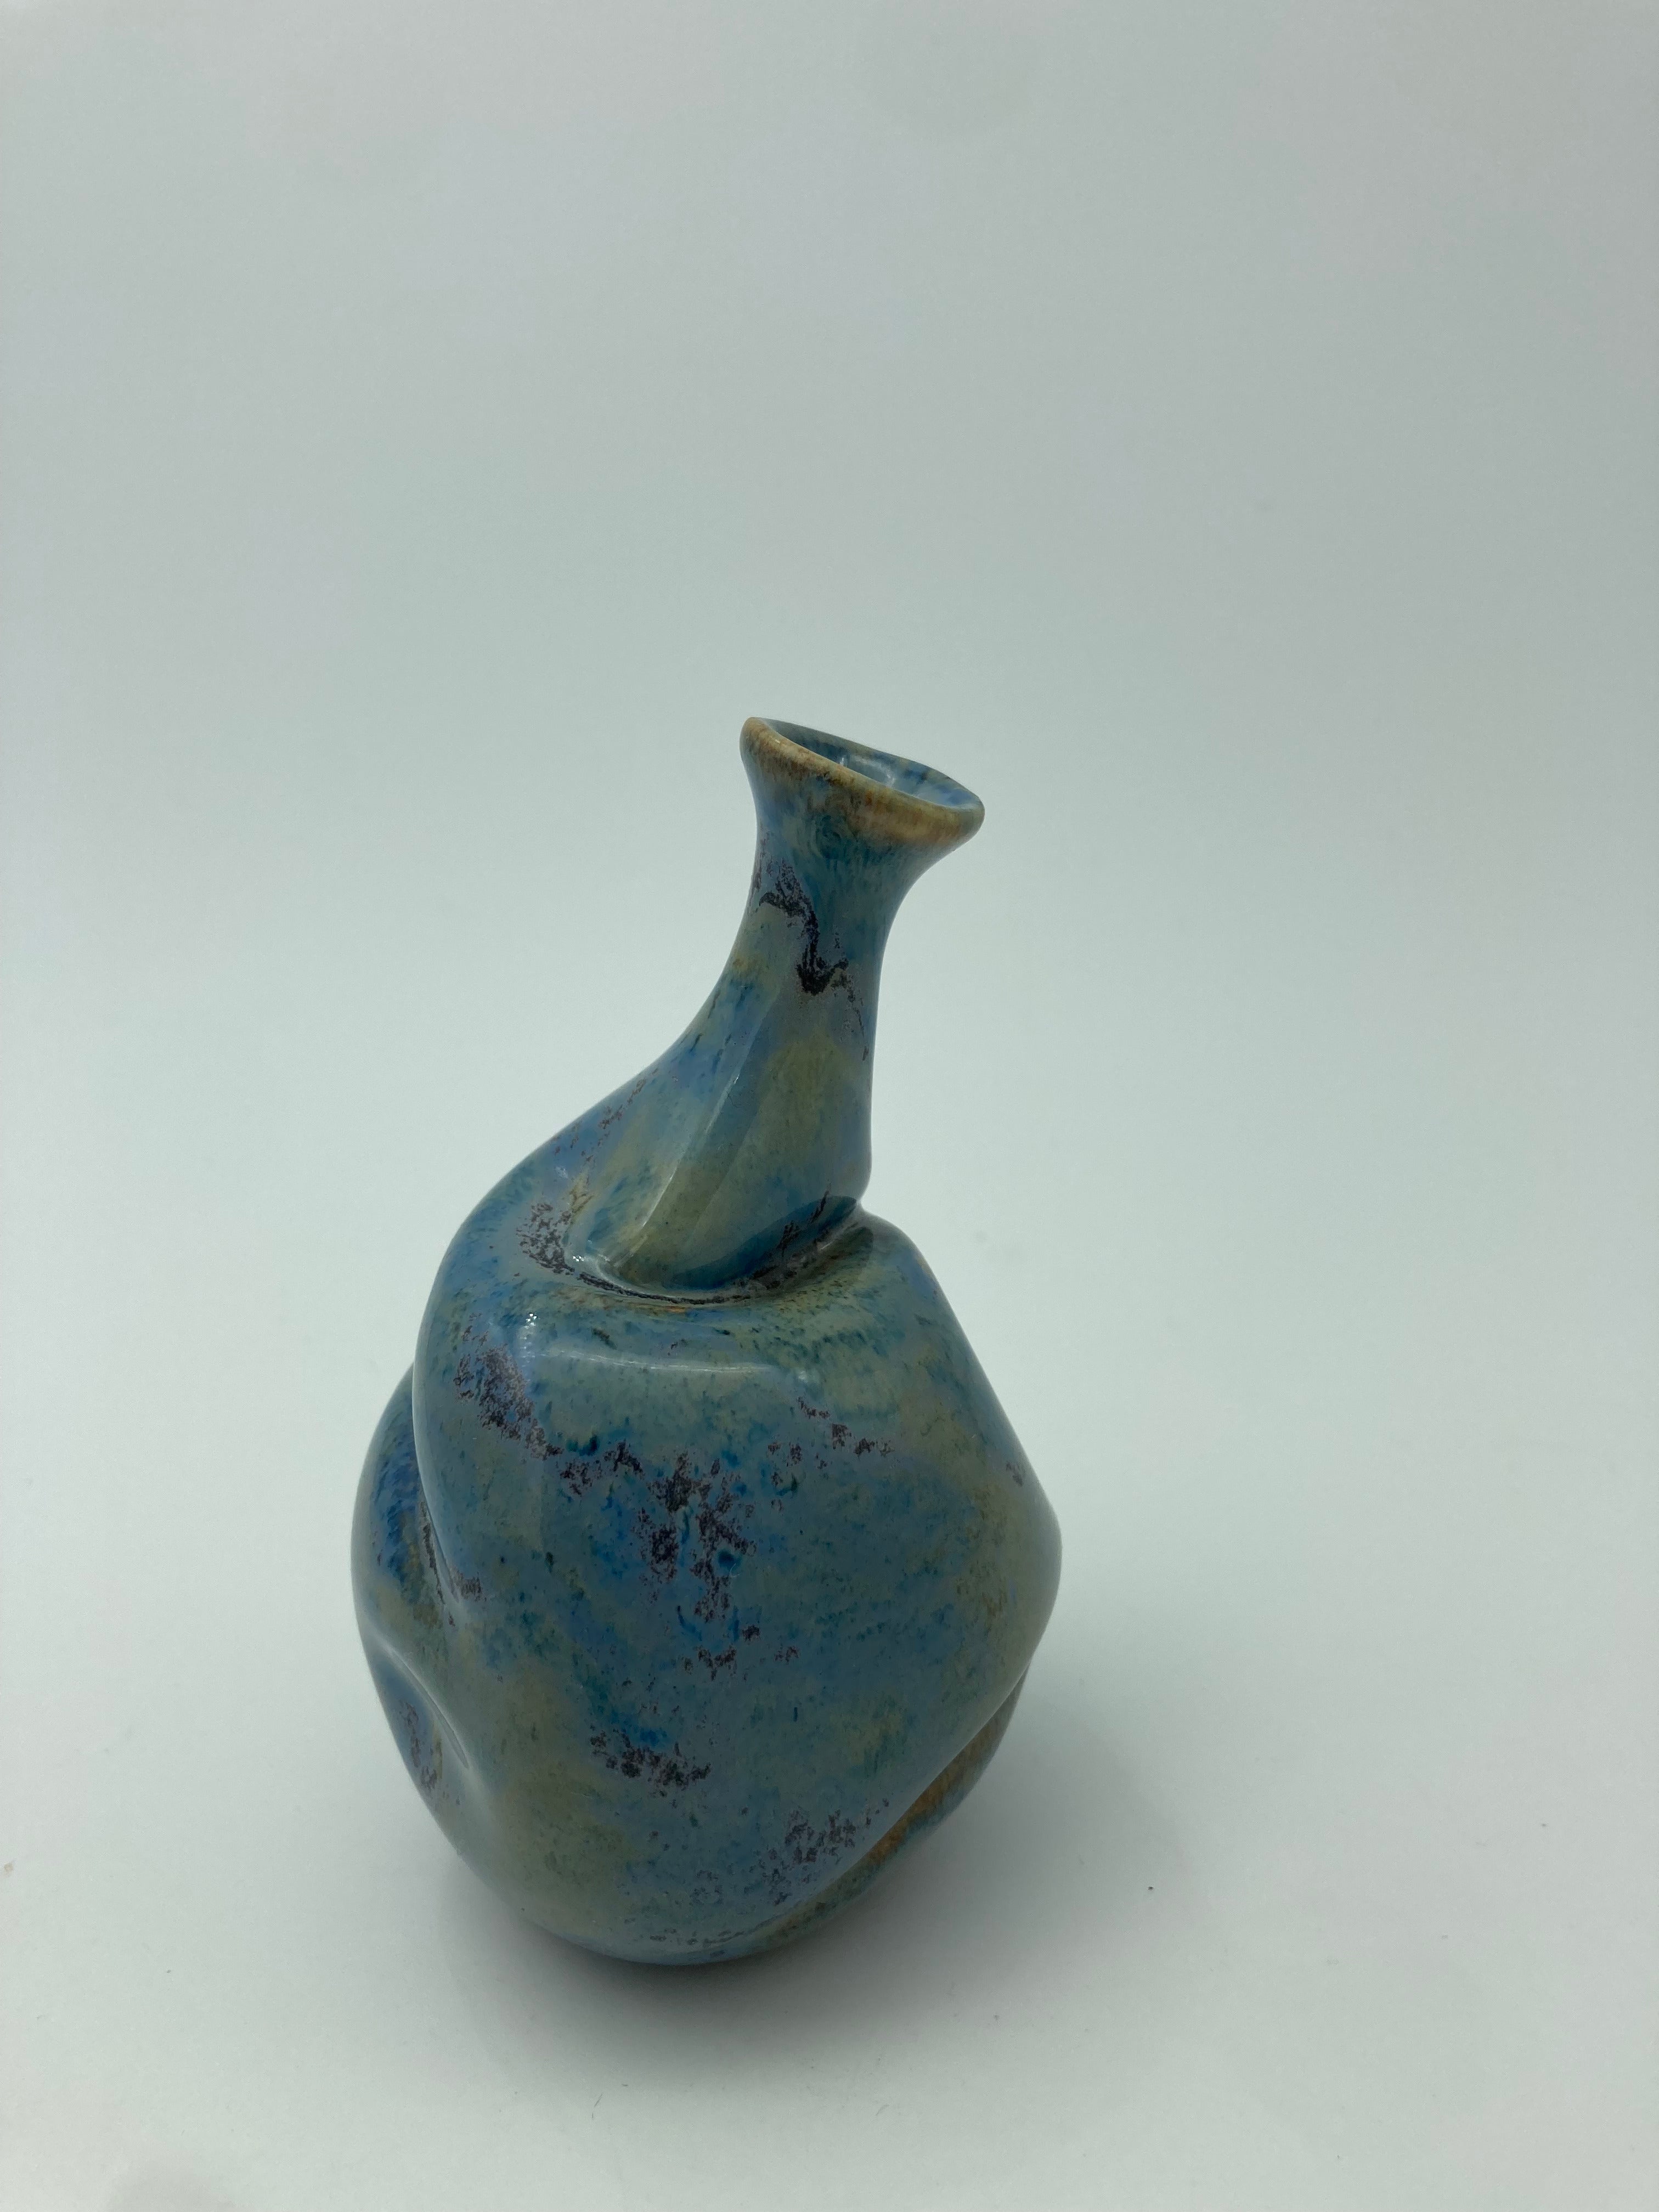 Small Vase/object